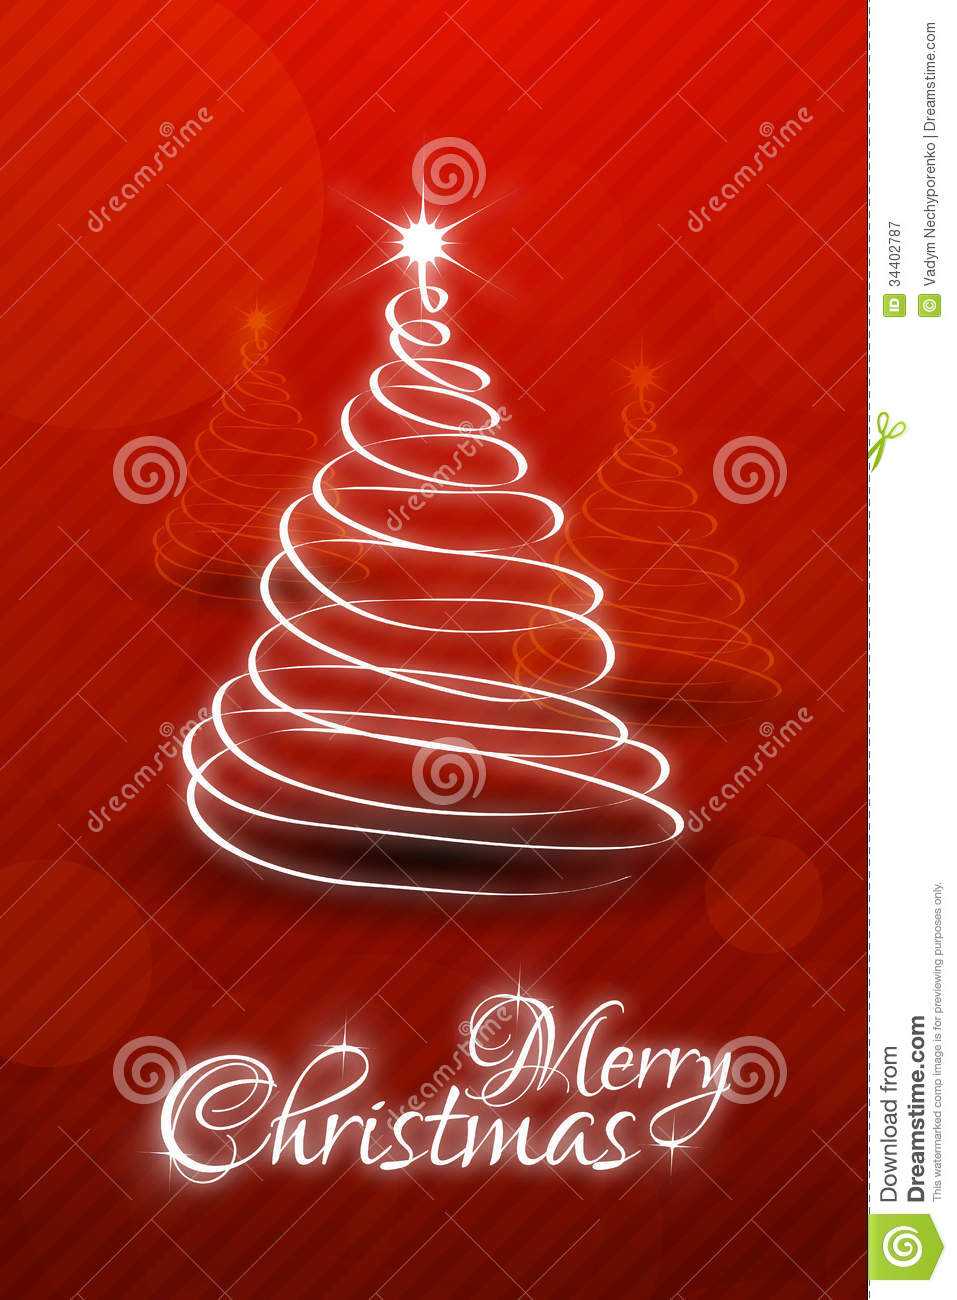 Christmas Card Template Stock Vector. Illustration Of Copy Regarding Christmas Photo Cards Templates Free Downloads